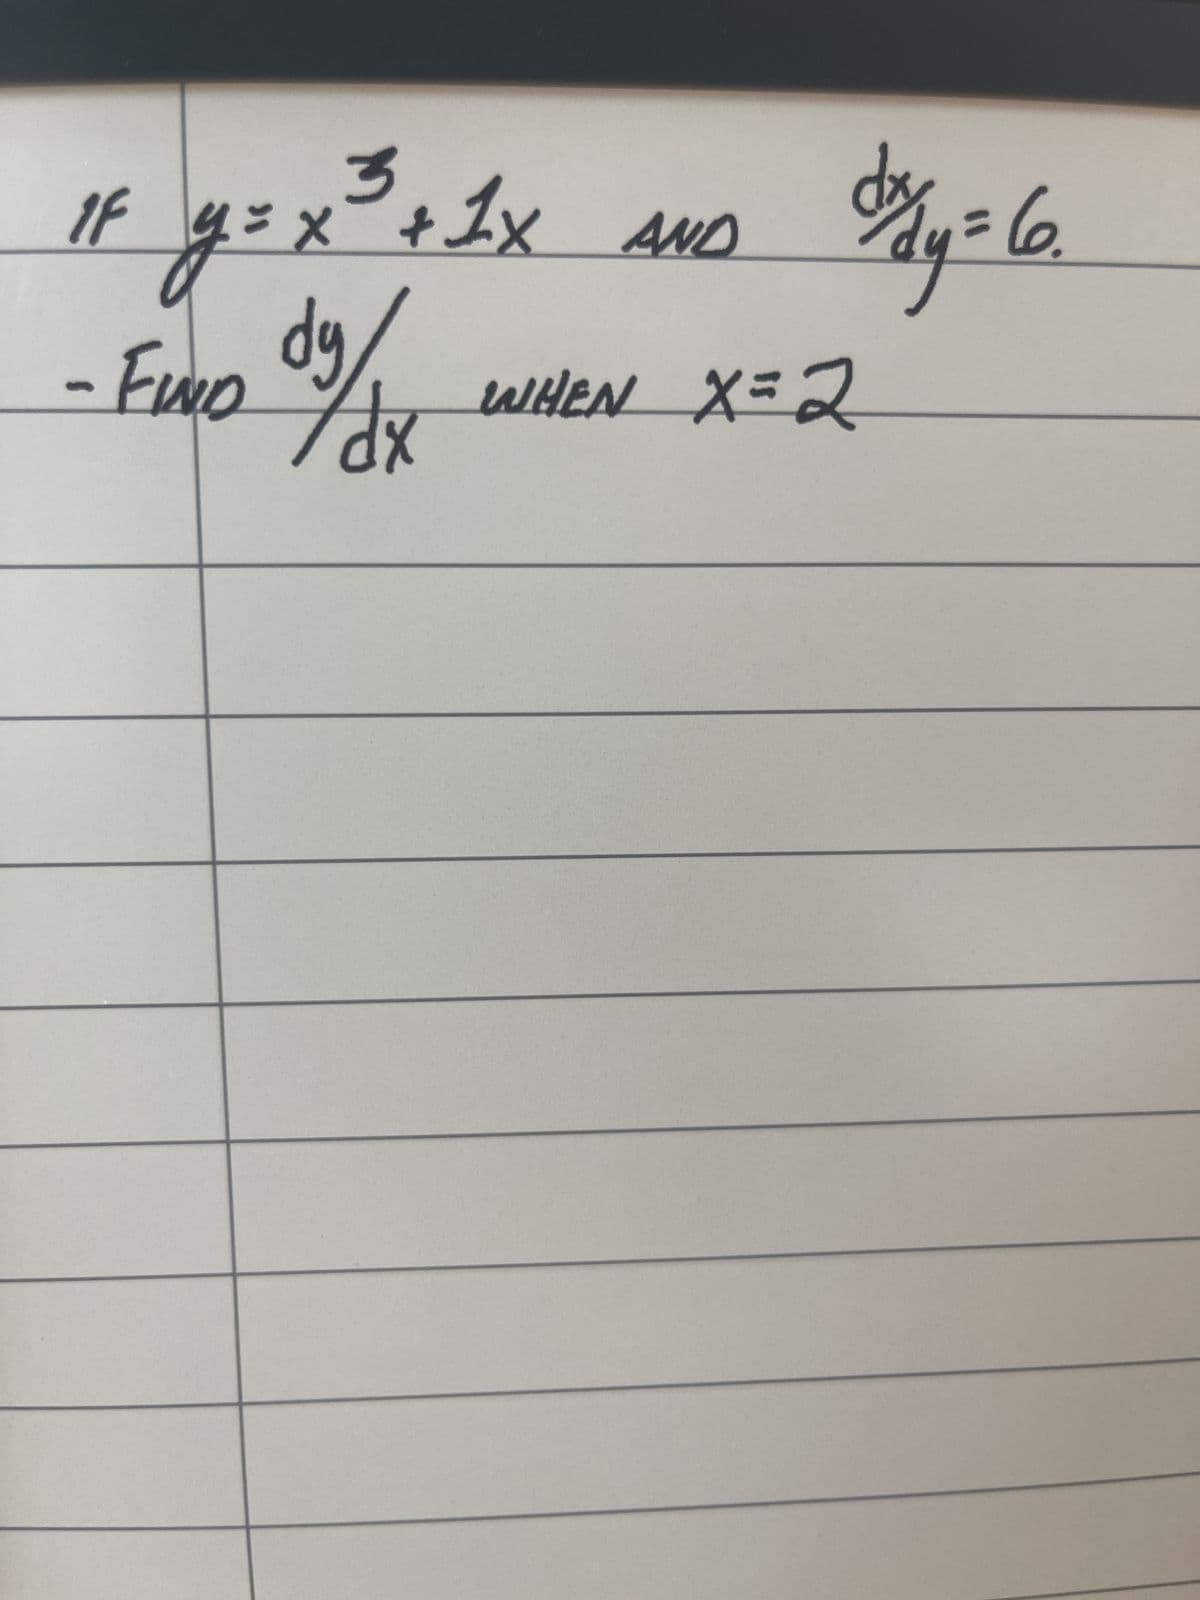 ۱۴
14 g
3
3+1x
1= x² + 1× AND
-FIND /dx
WHEN X=2
=6.